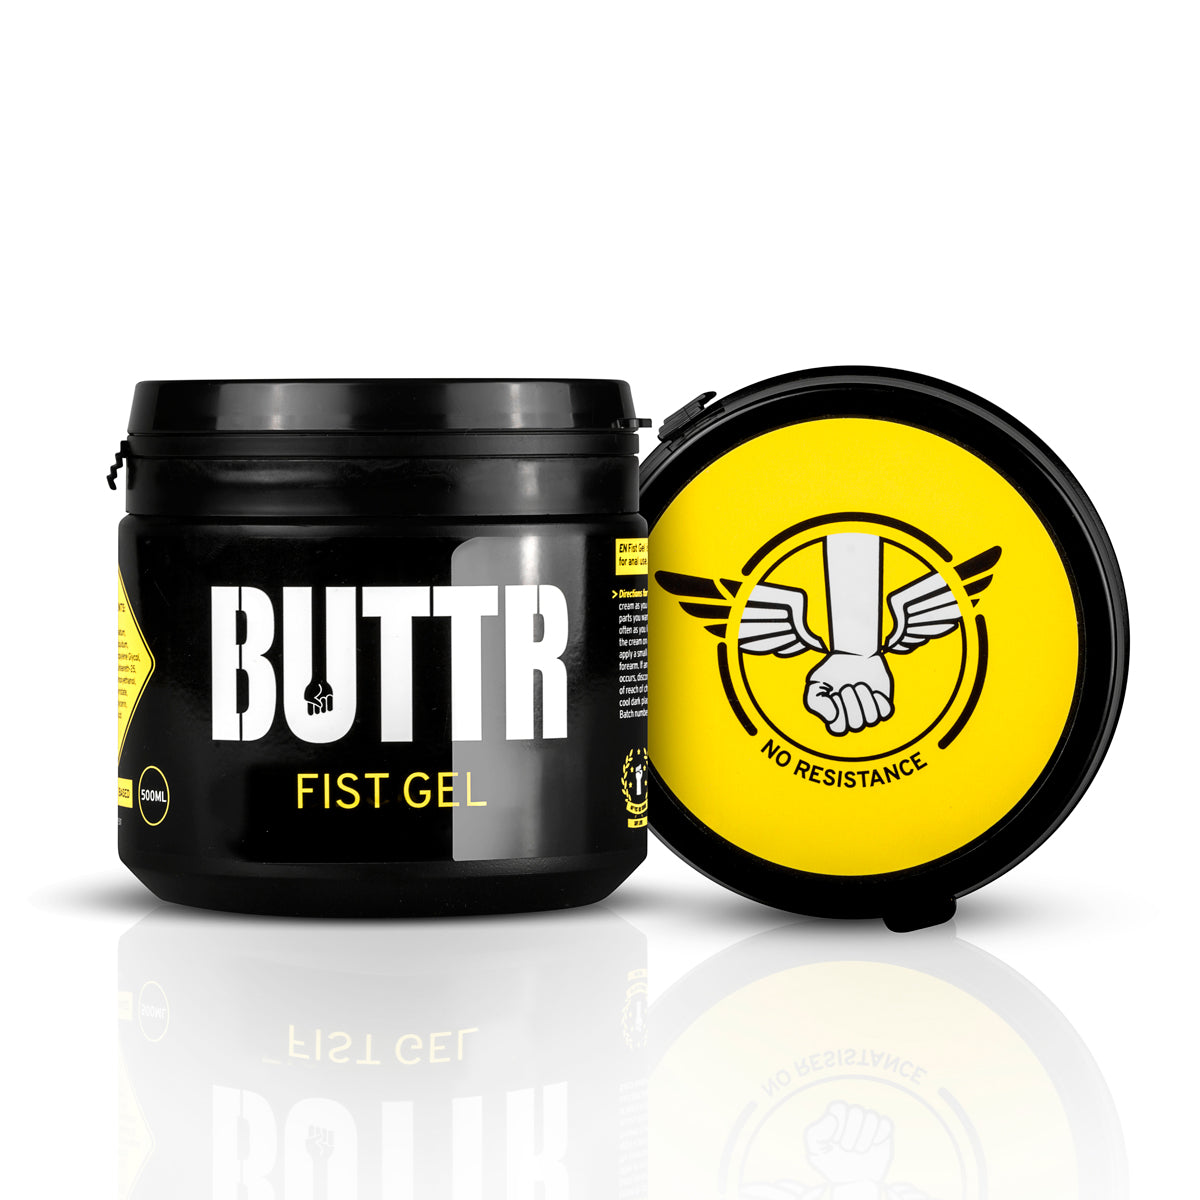 BUTTR - Water Based Fisting Gel